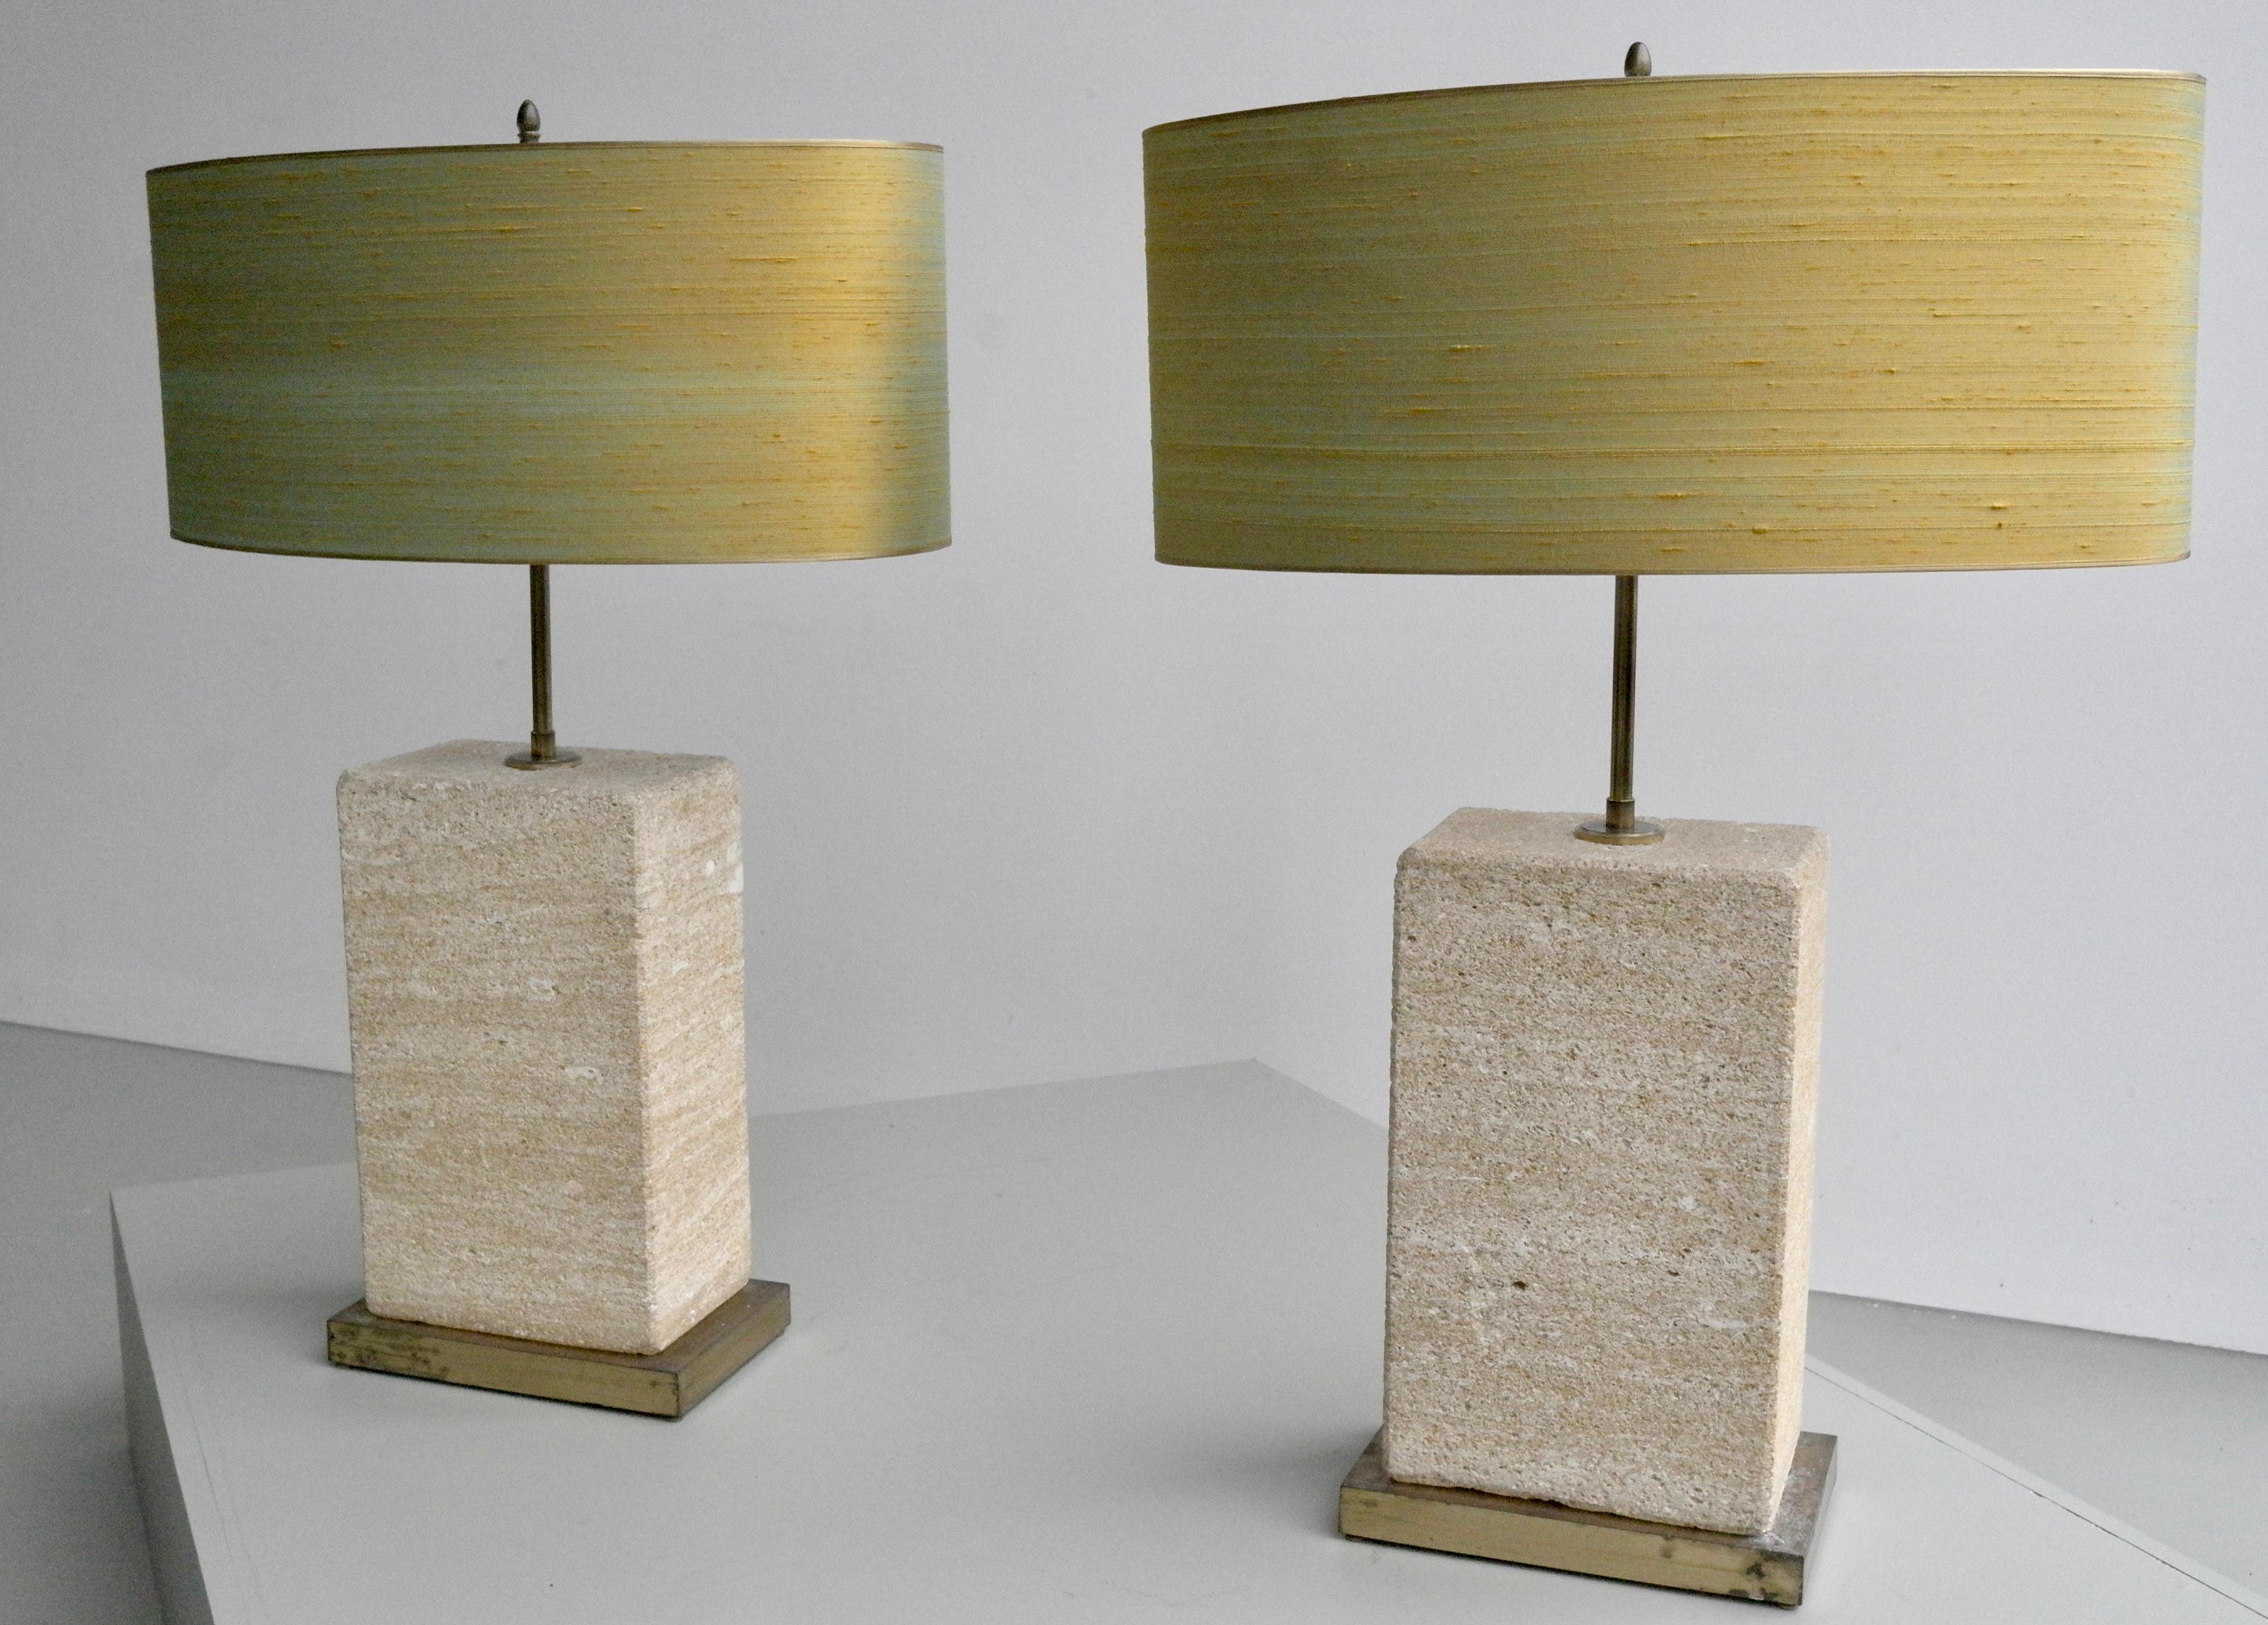 Pair of extra large sandstone, brass and silk table lamps by Roger Vanhevel.
The shades from the pair are newly upholstered in gold/yellow thread silk. Very large and heavy pieces, these lights are dimmable and adjustable in height.